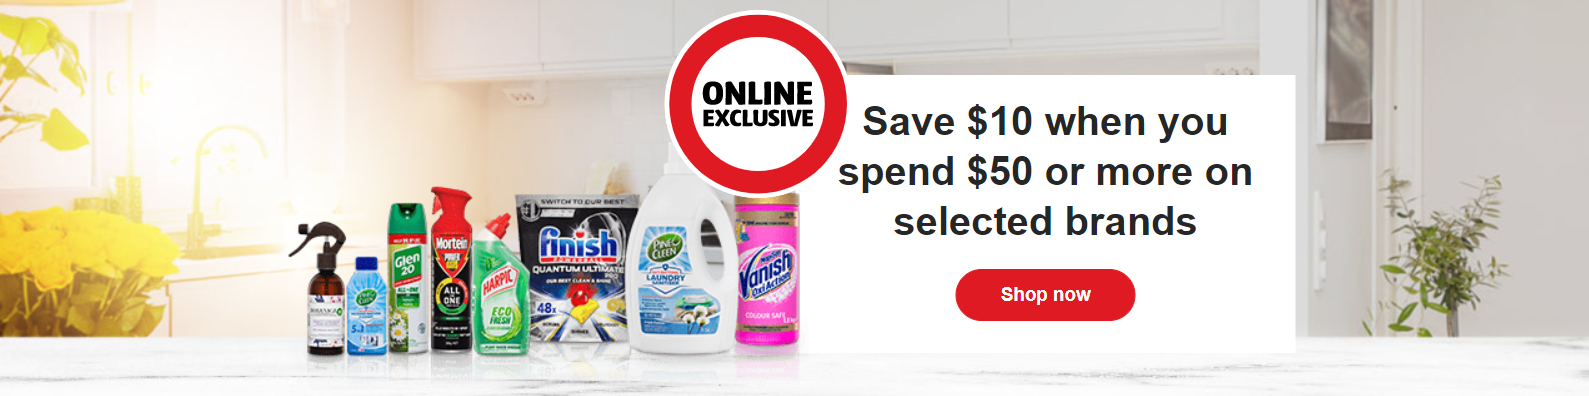 Save $10 when you spend $50 or more on selected brands